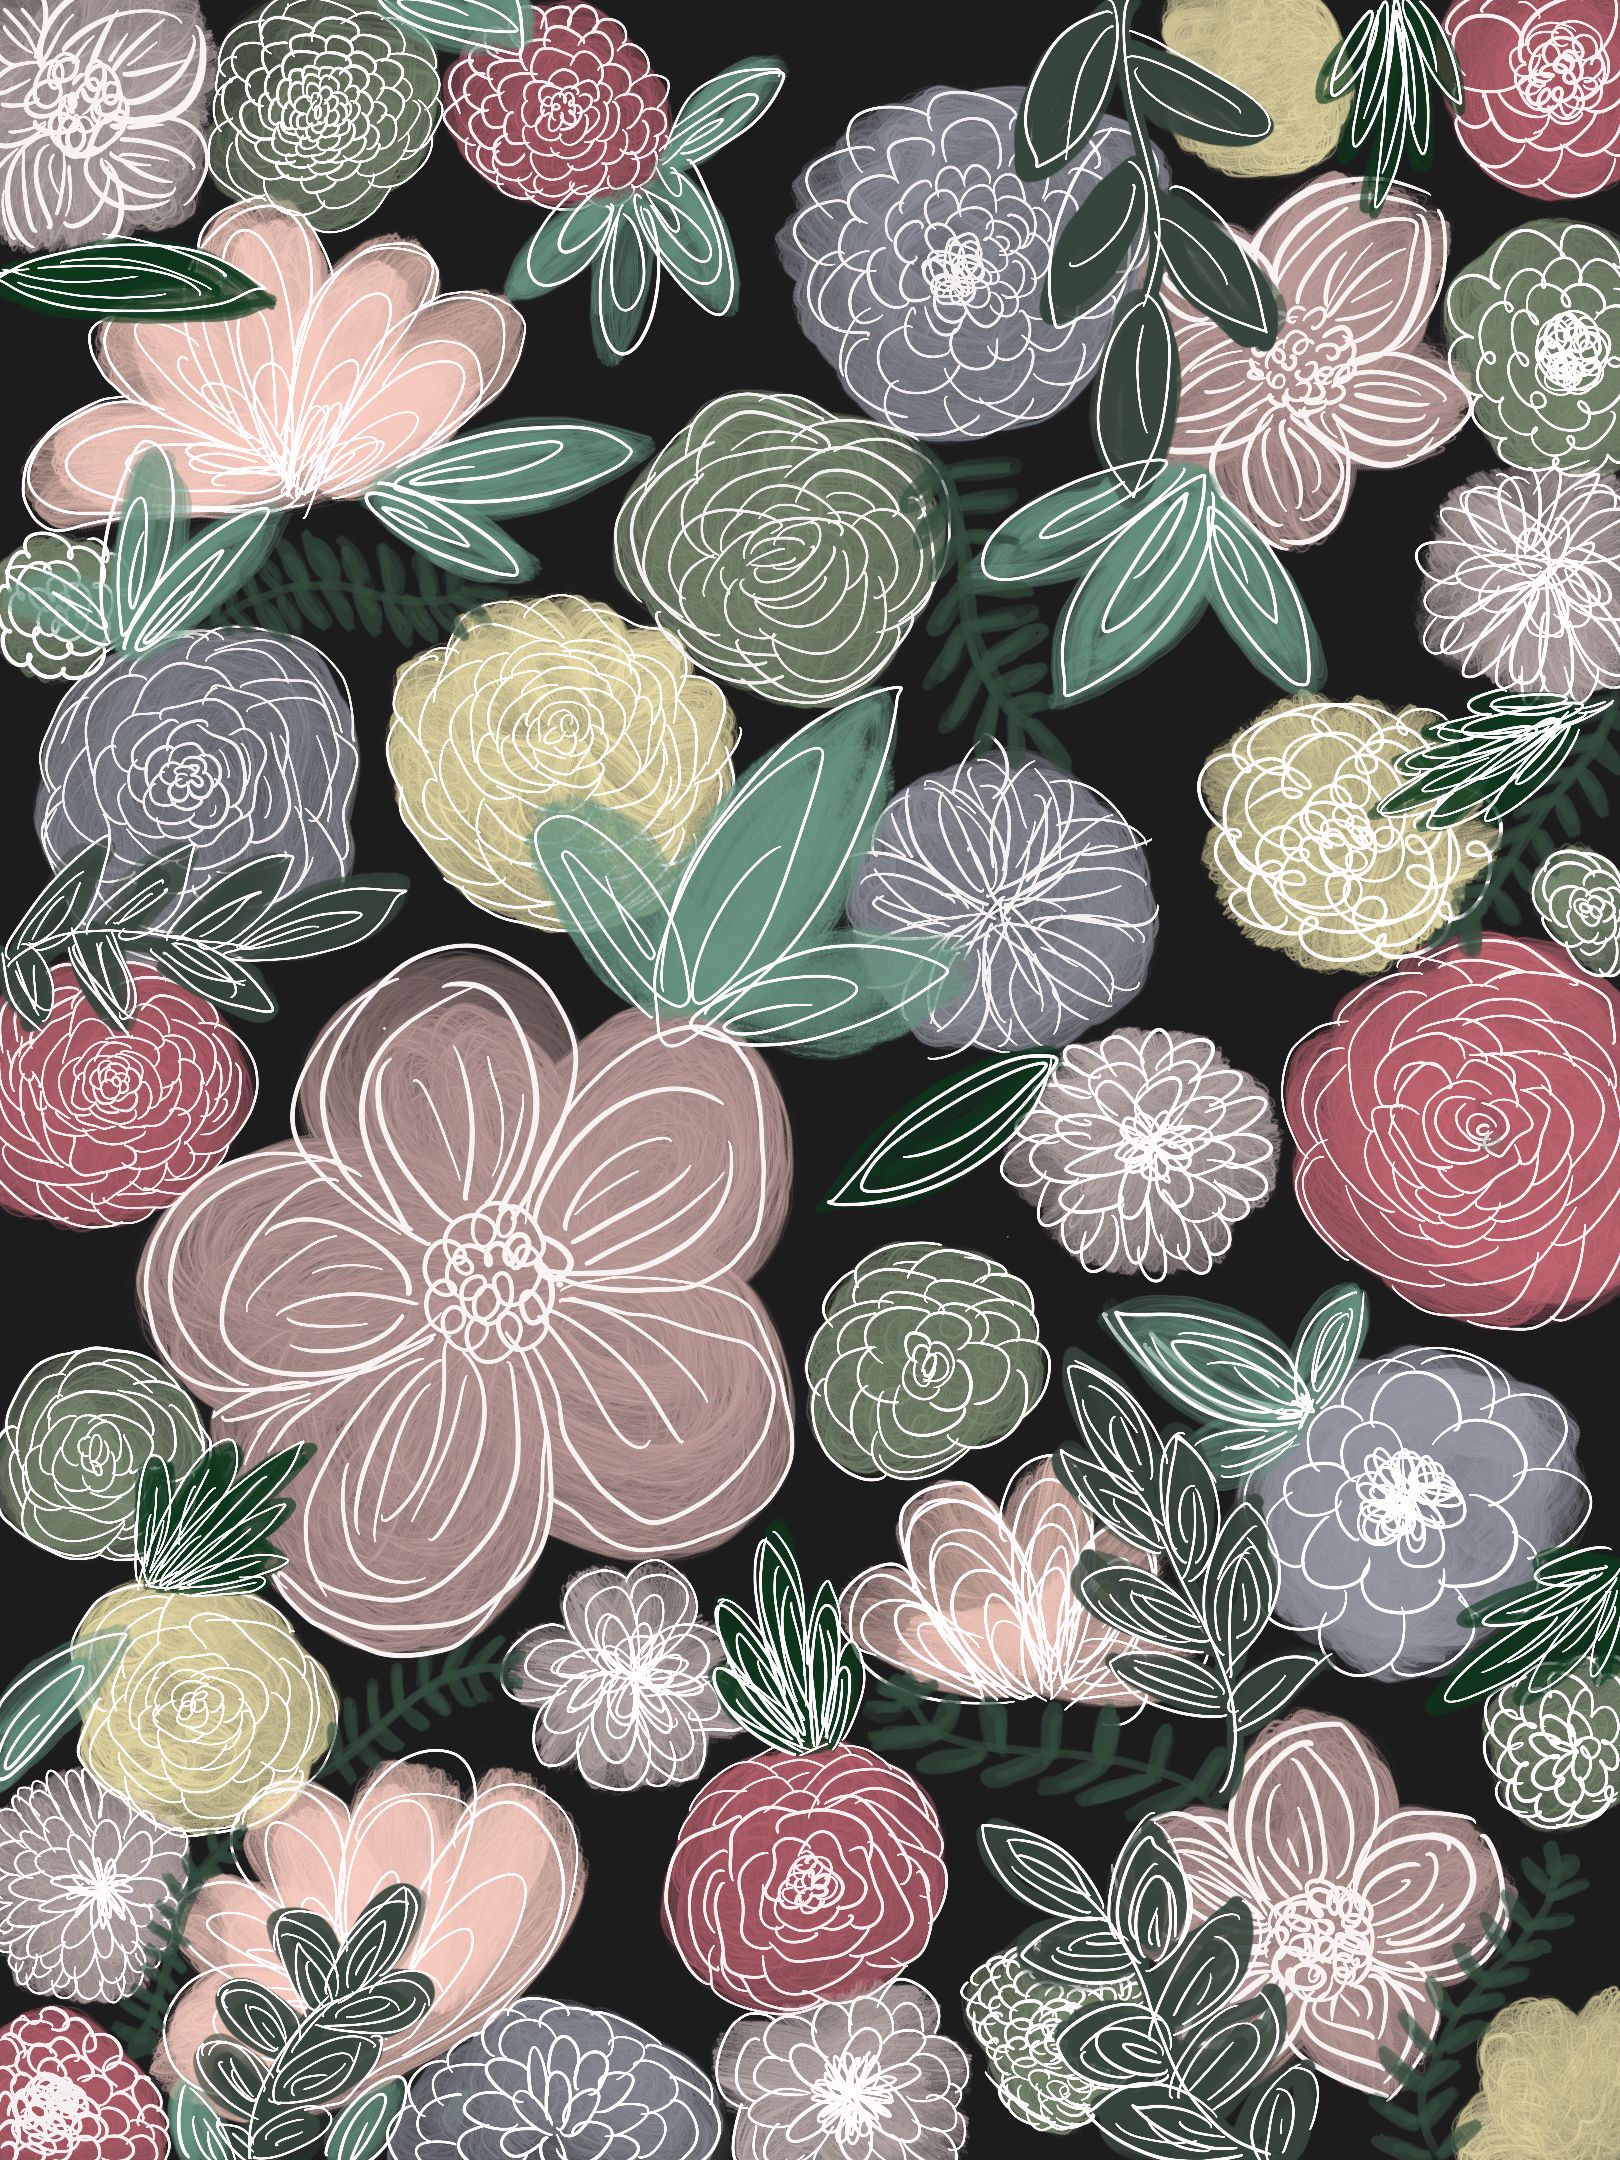 Floral Ipad Wallpapers